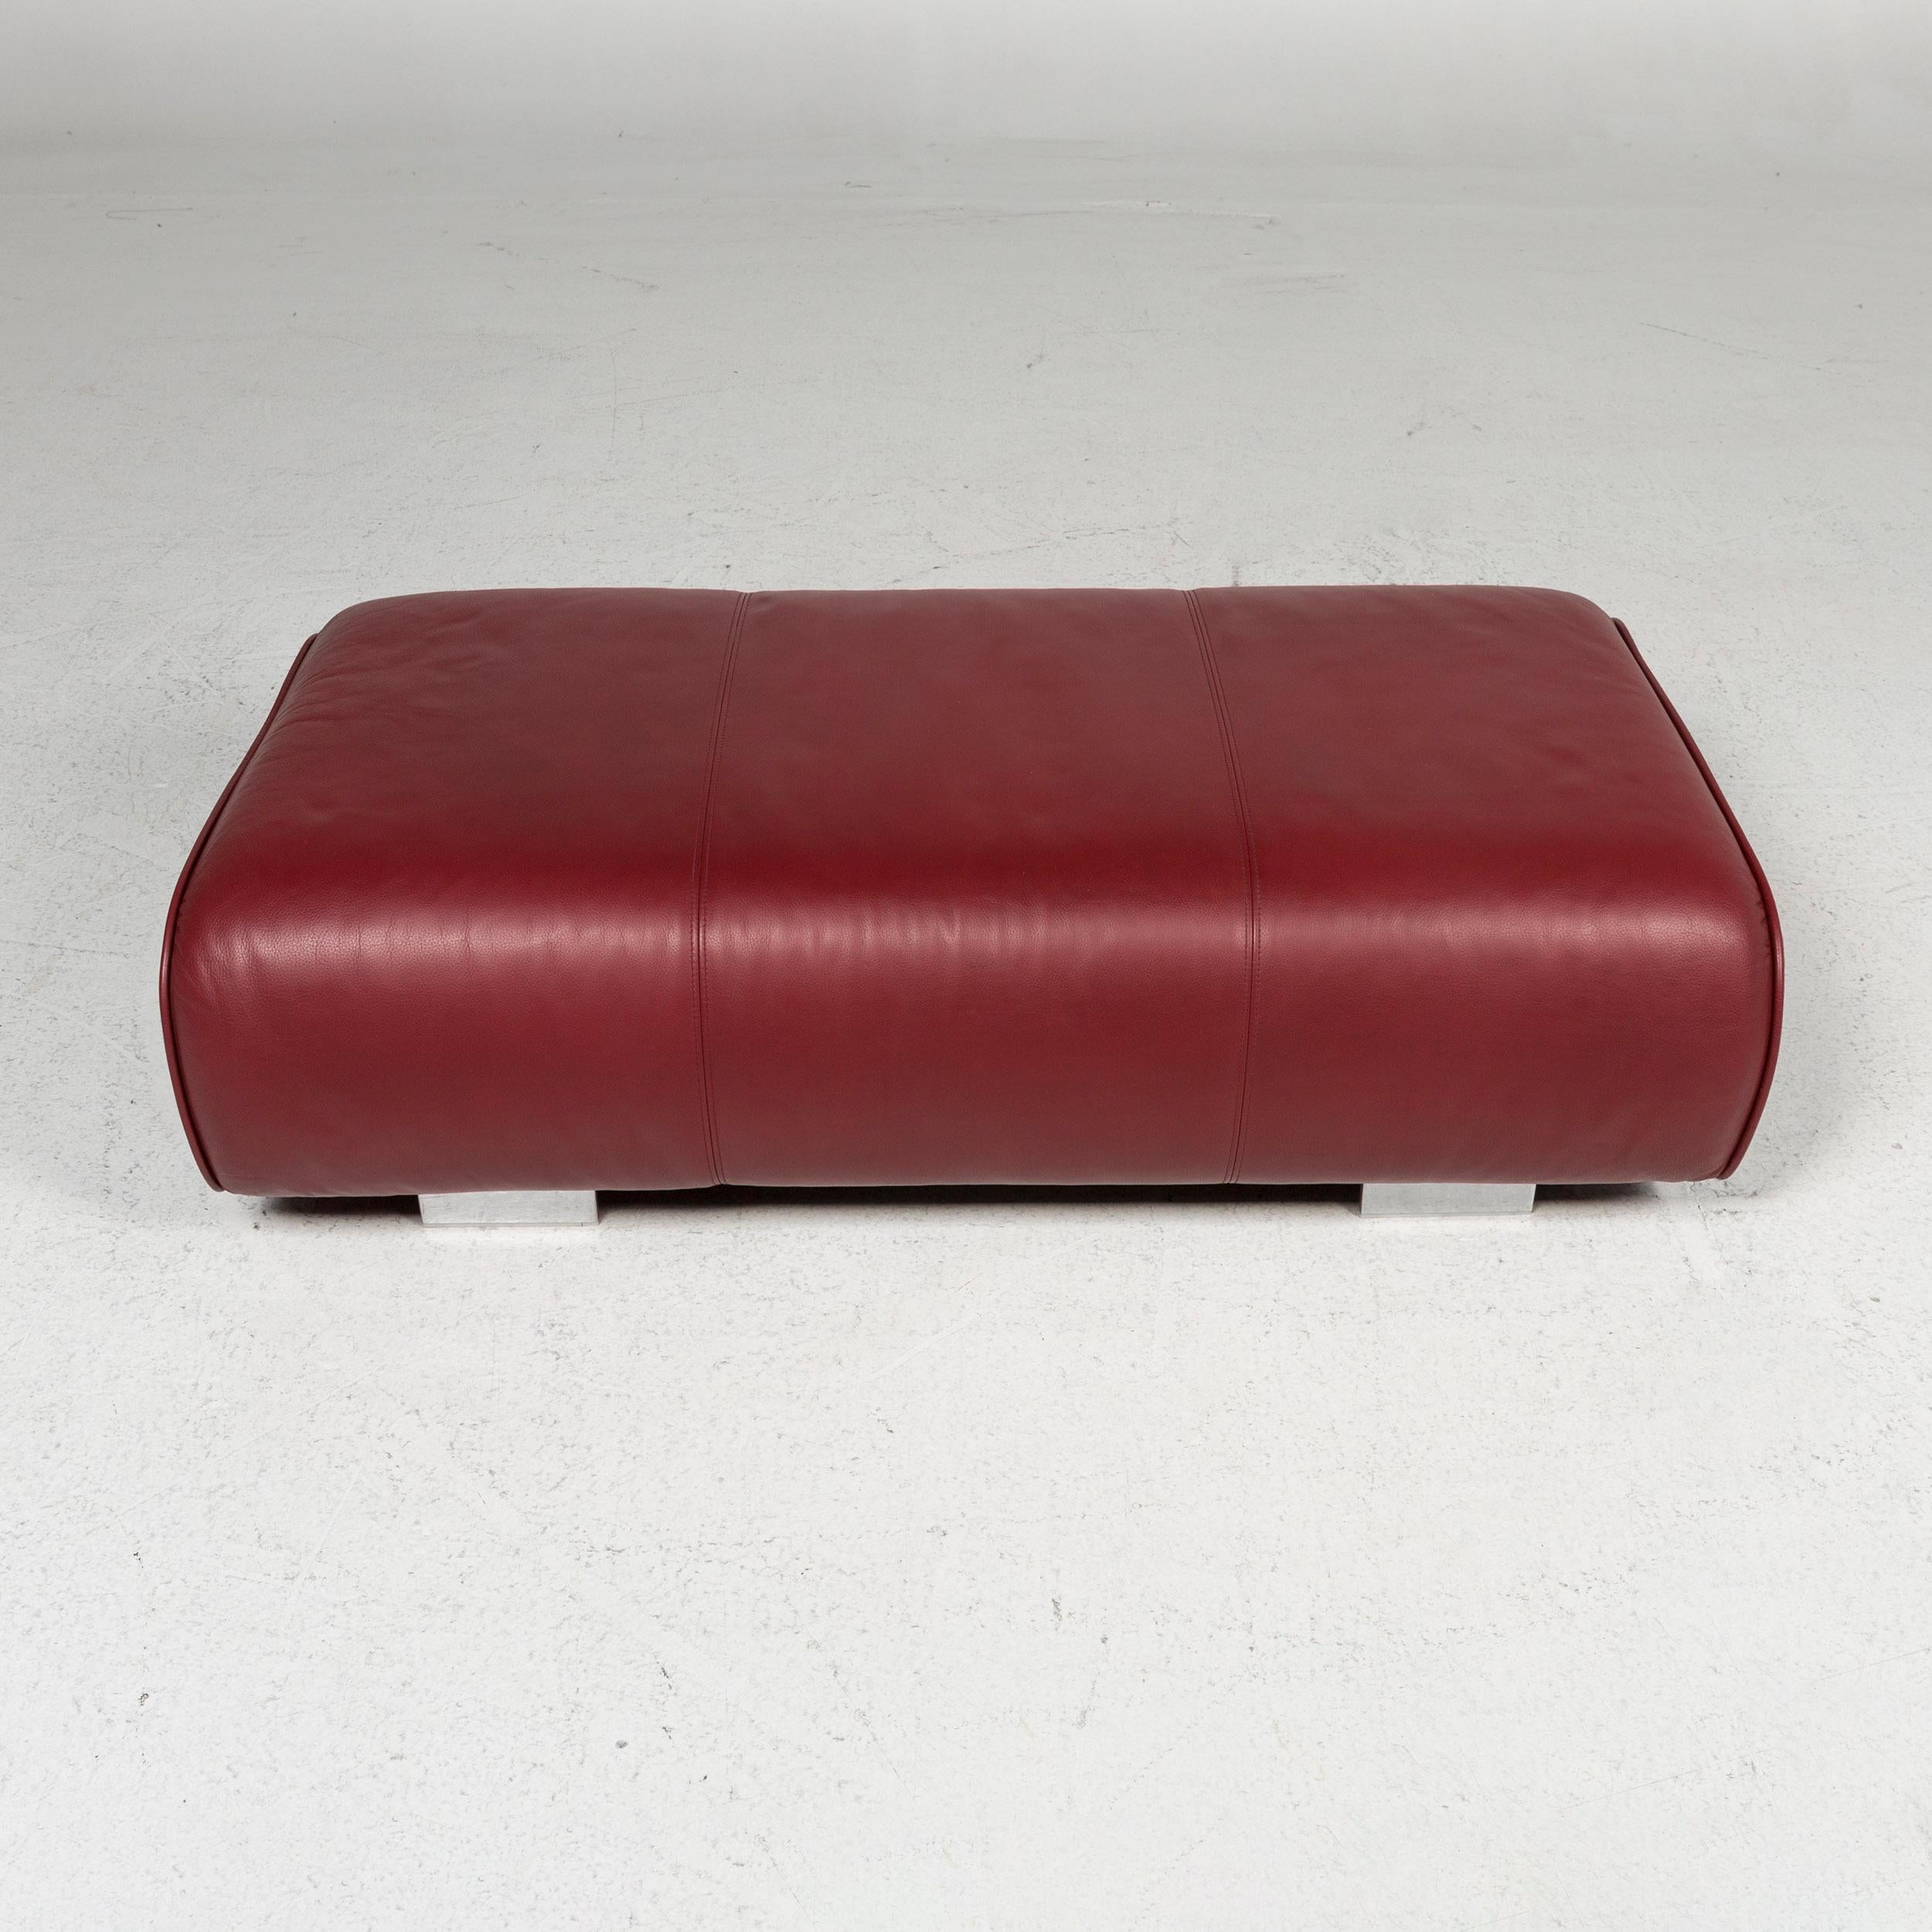 German Rolf Benz Leather Ottoman Red For Sale